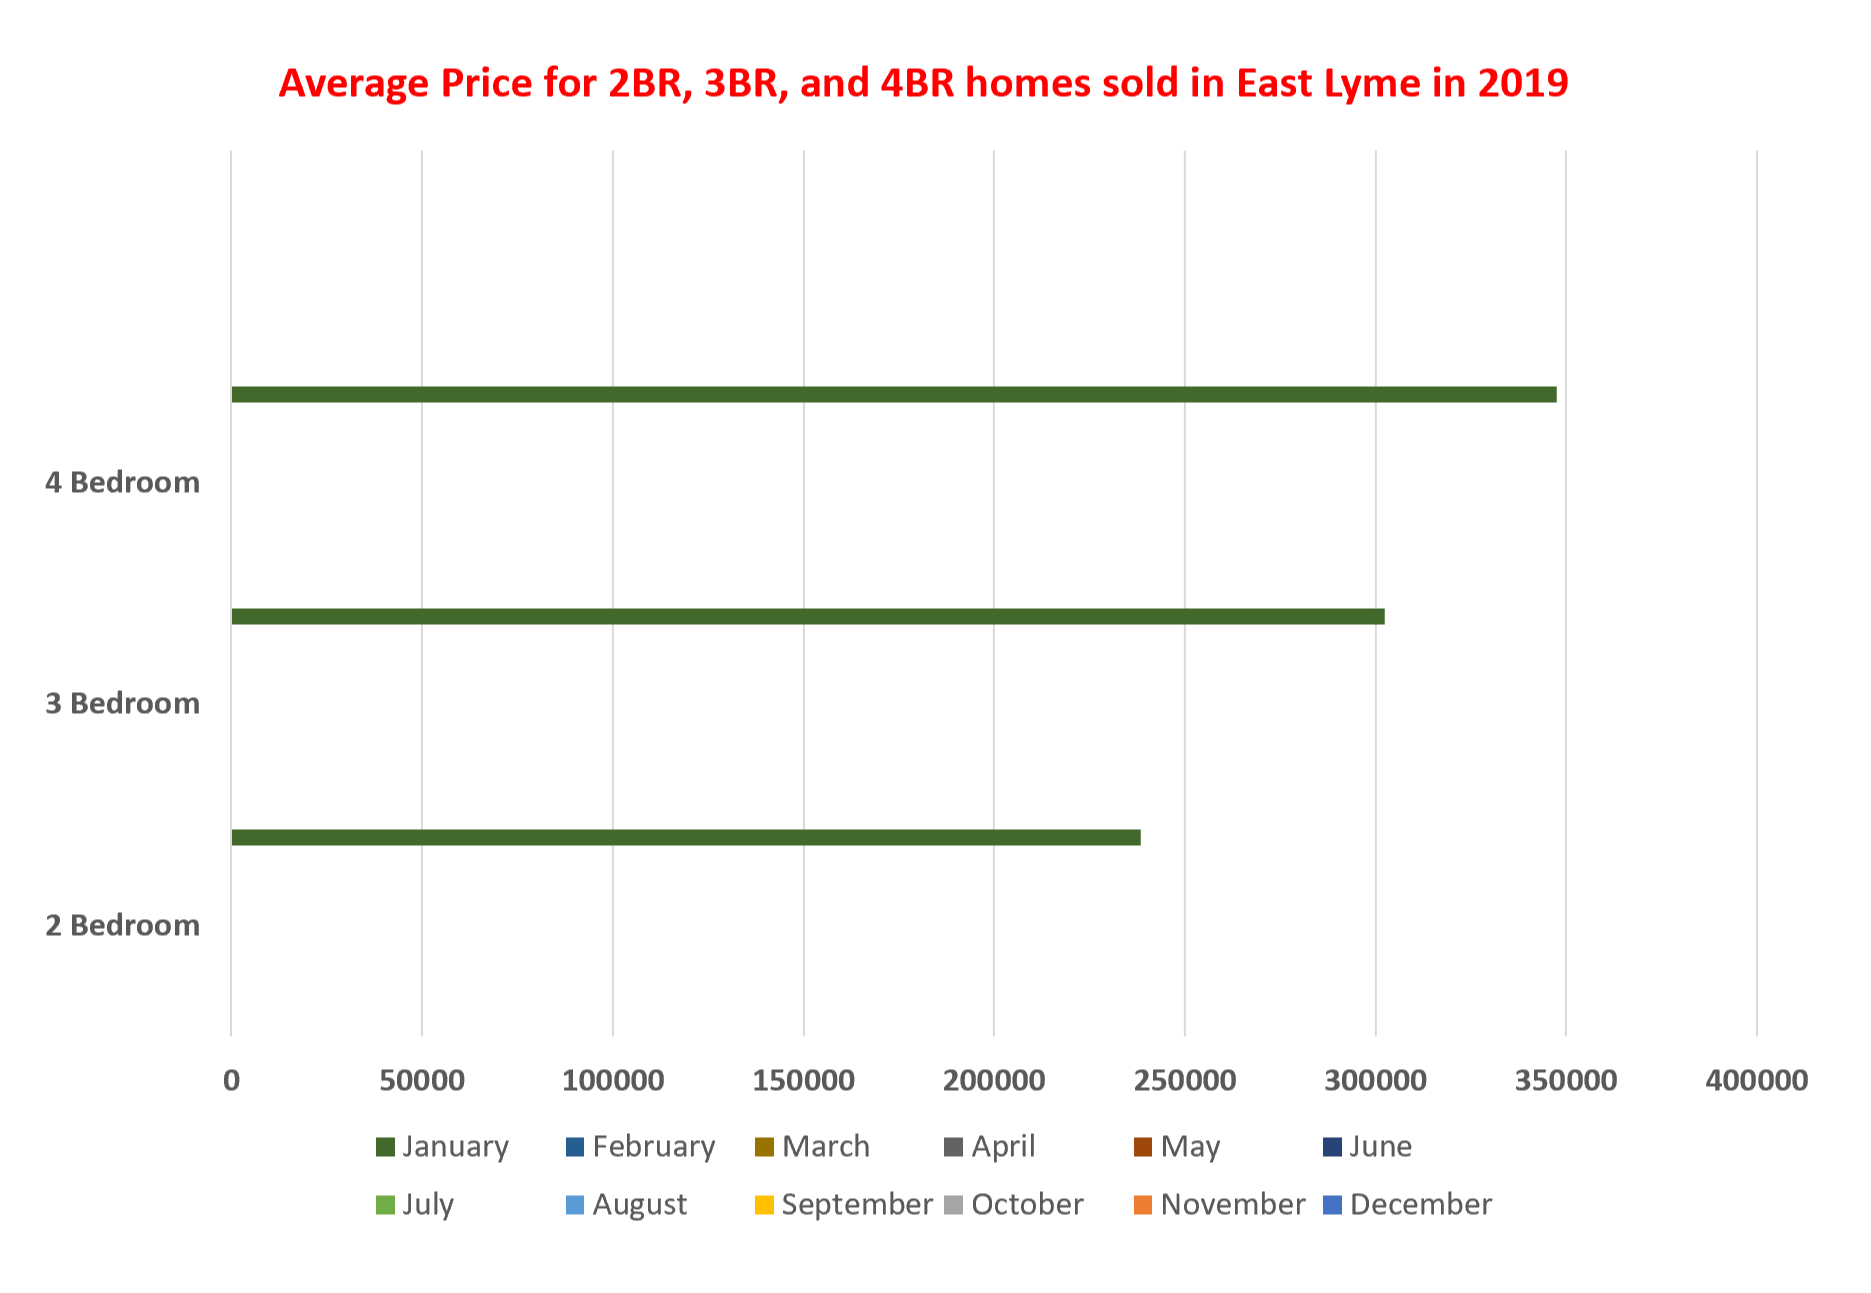 East Lyme Average prices for homes sold in January 2019 from East Lyme Realtor Bridget Morrissey